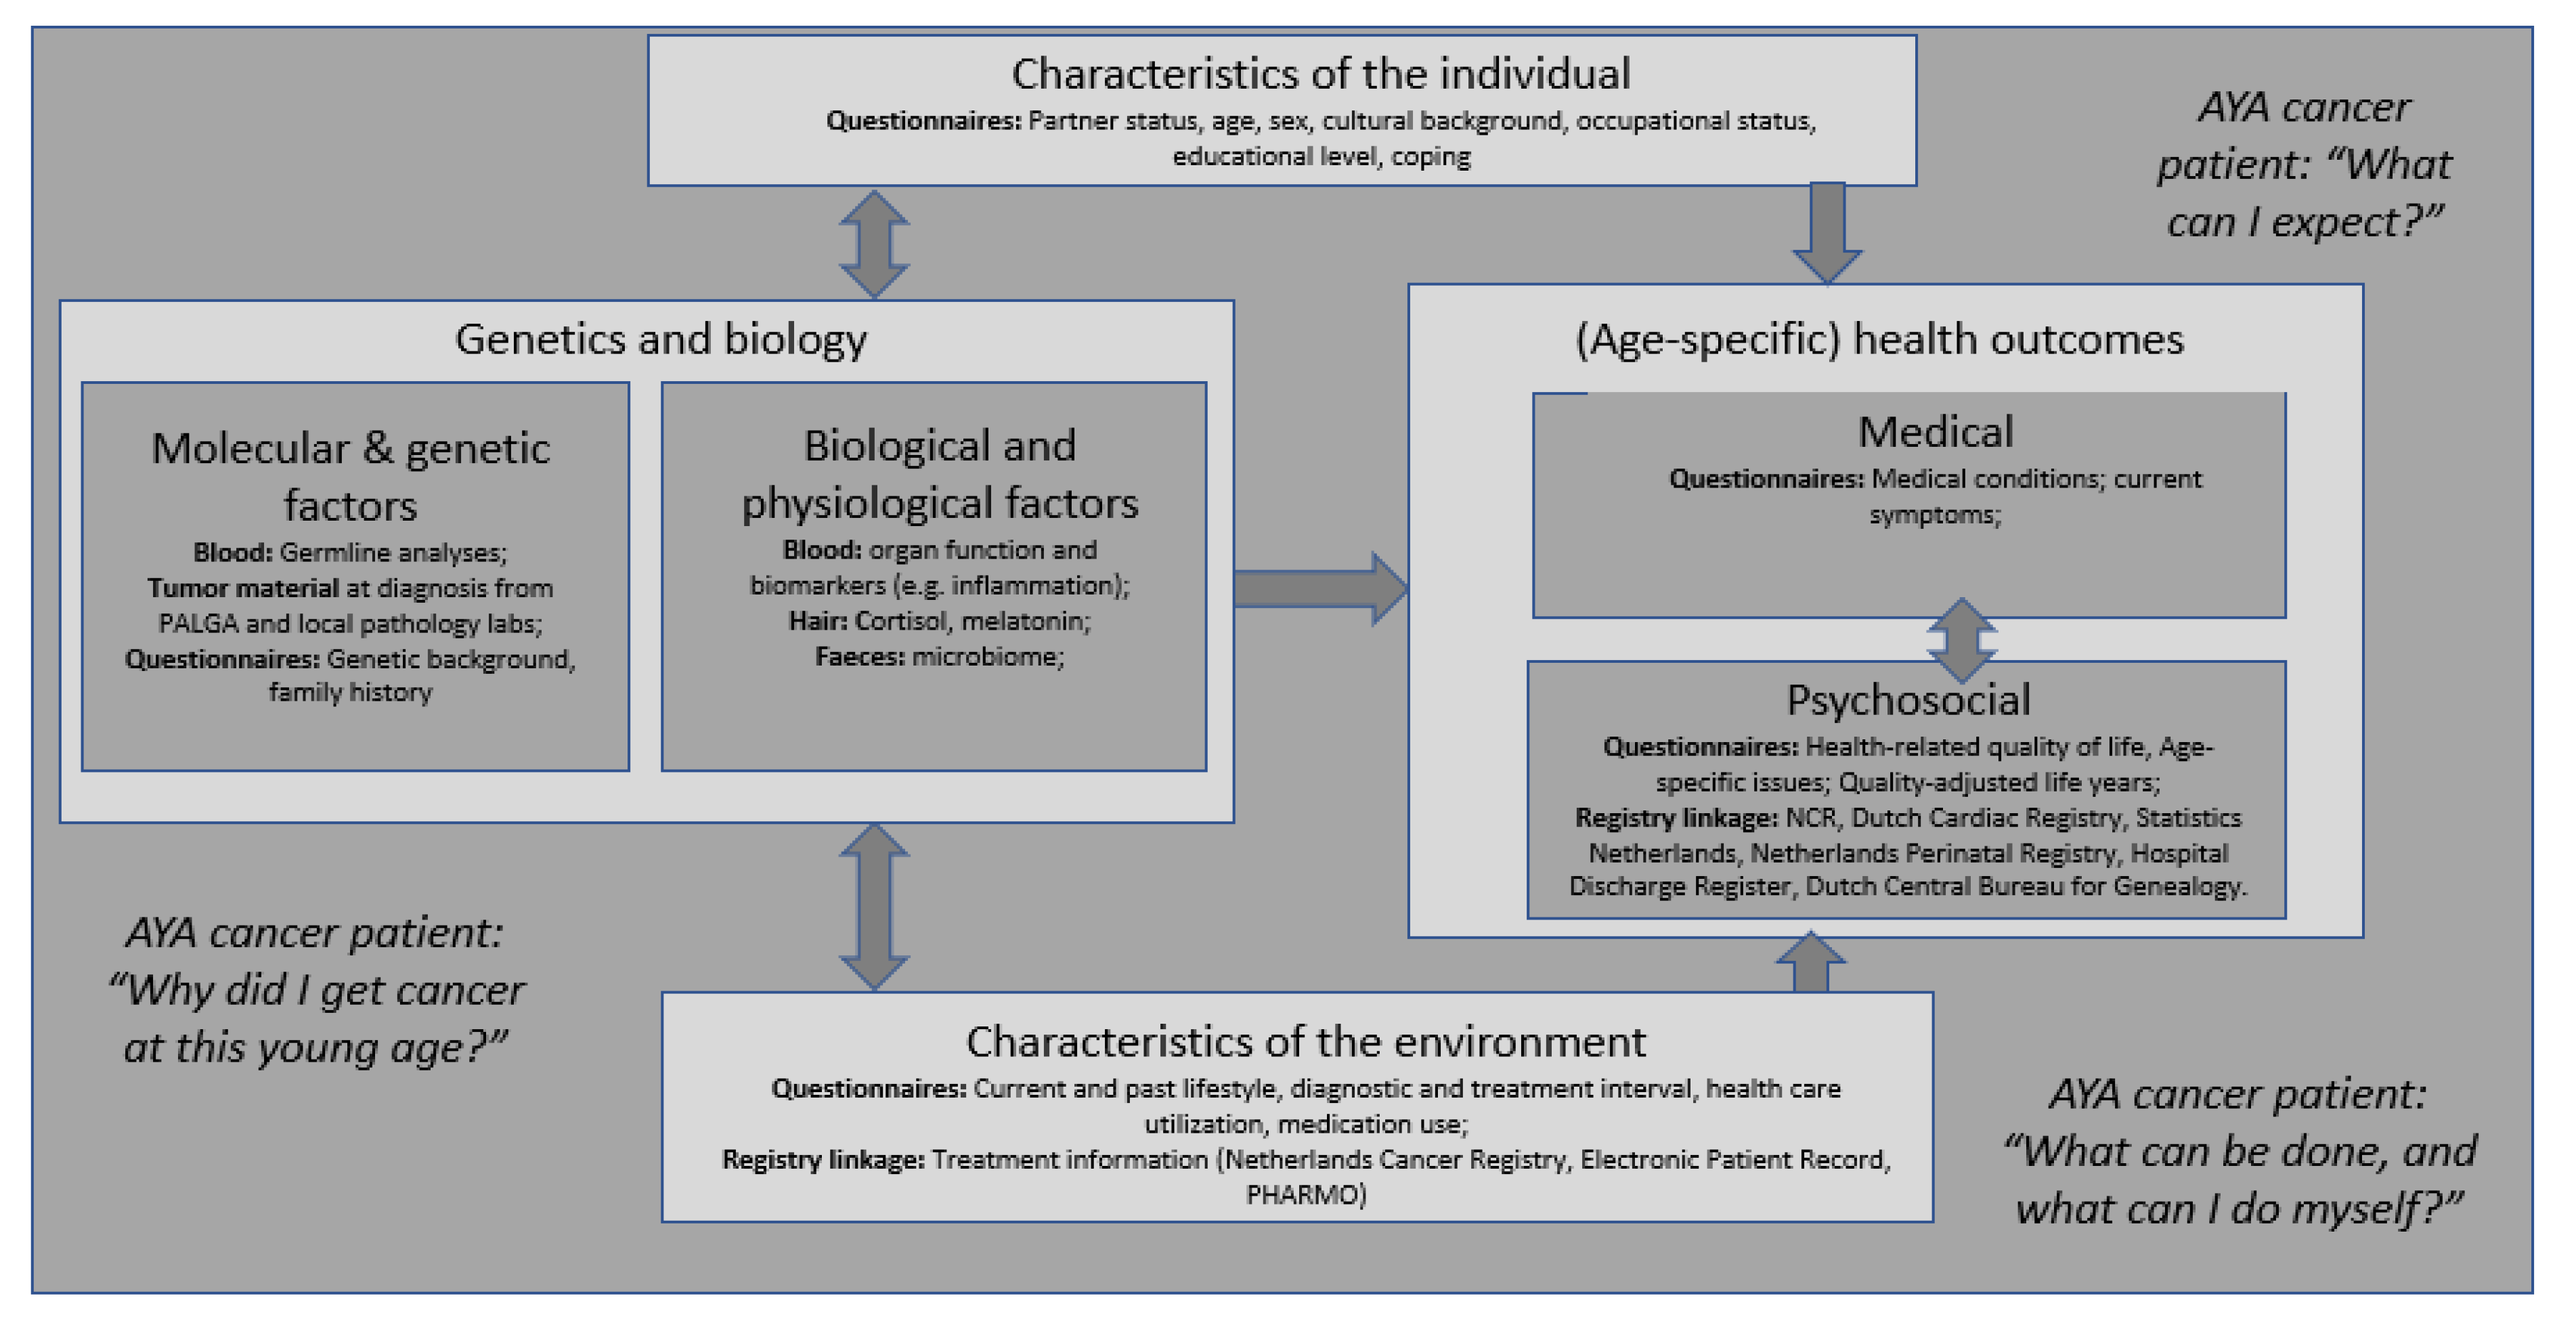 Cancers | Free Full-Text | Comprehensive Assessment of Incidence, Risk  Factors, and Mechanisms of Impaired Medical and Psychosocial Health  Outcomes among Adolescents and Young Adults with Cancer: Protocol of the  Prospective Observational